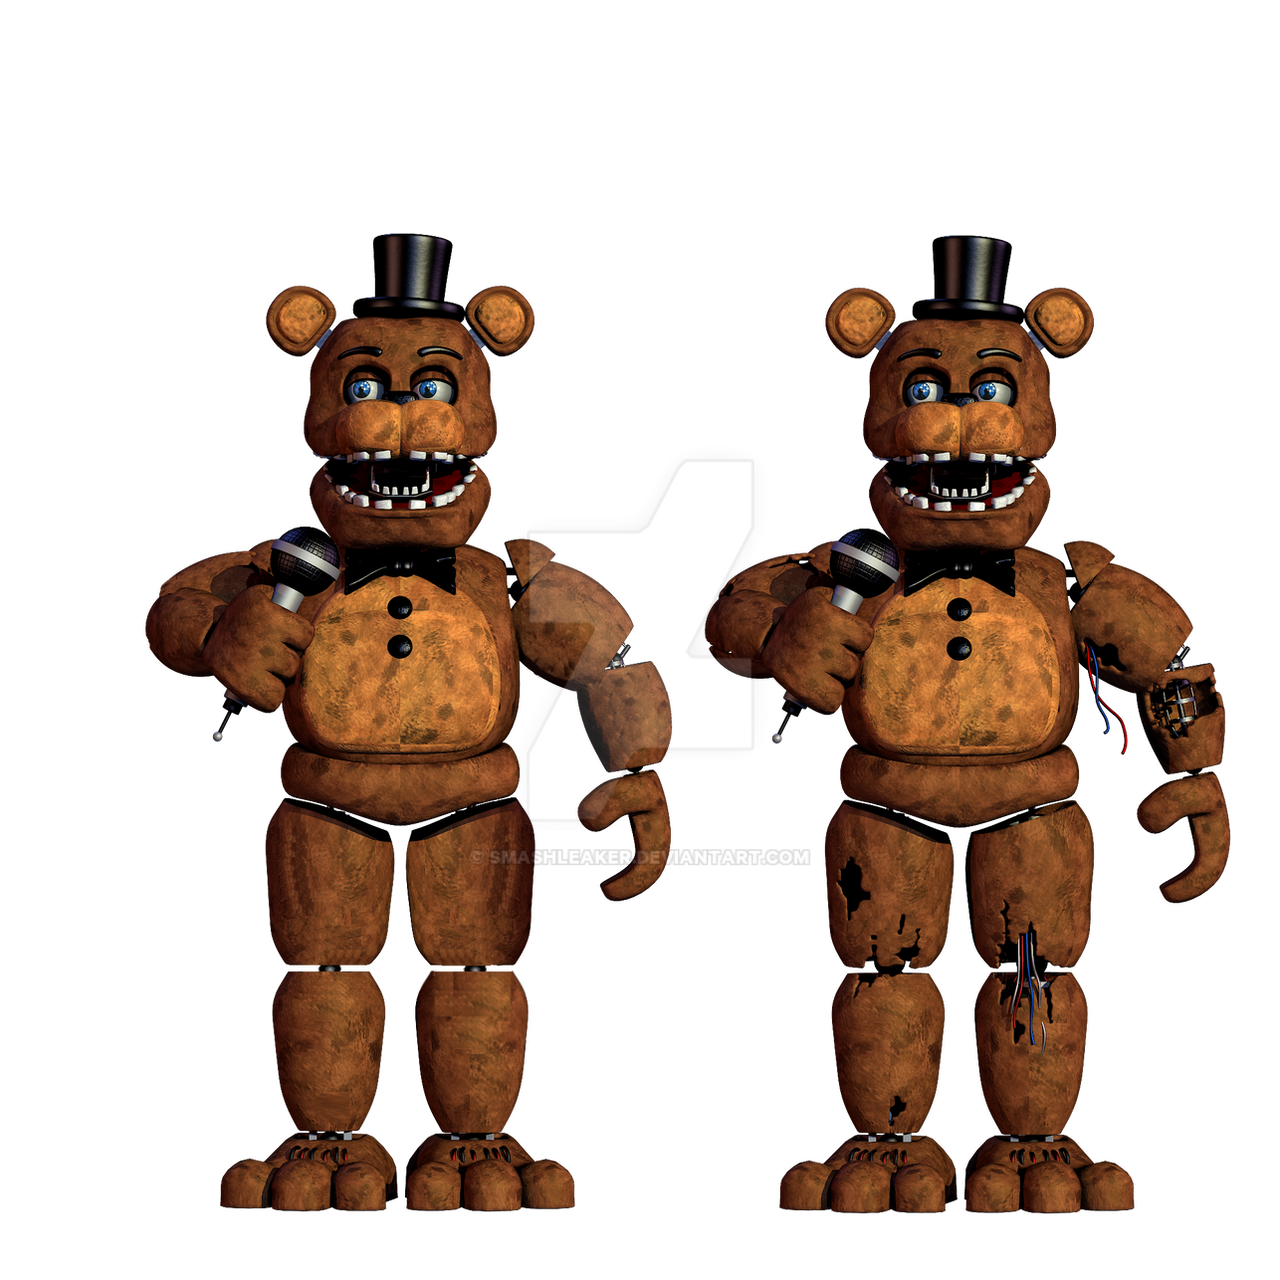 Withered Freddy has been fixed! Unwithered Freddy! (FNaF 2 Mod) 